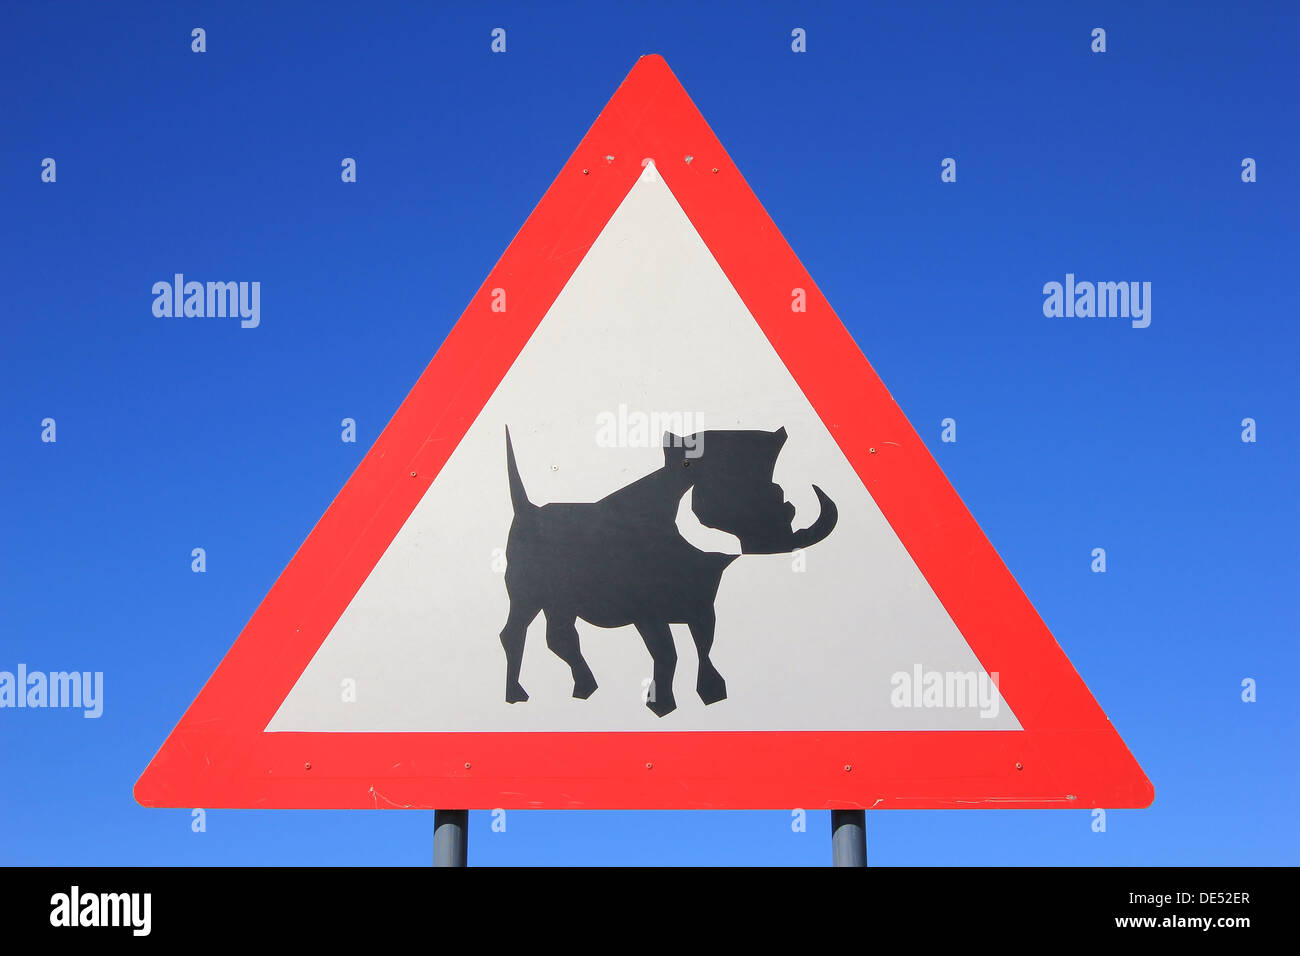 Warthog - A road warning sign to alert drivers and road users of possible and irregular crossings by animals.  Avoid accidents. Stock Photo